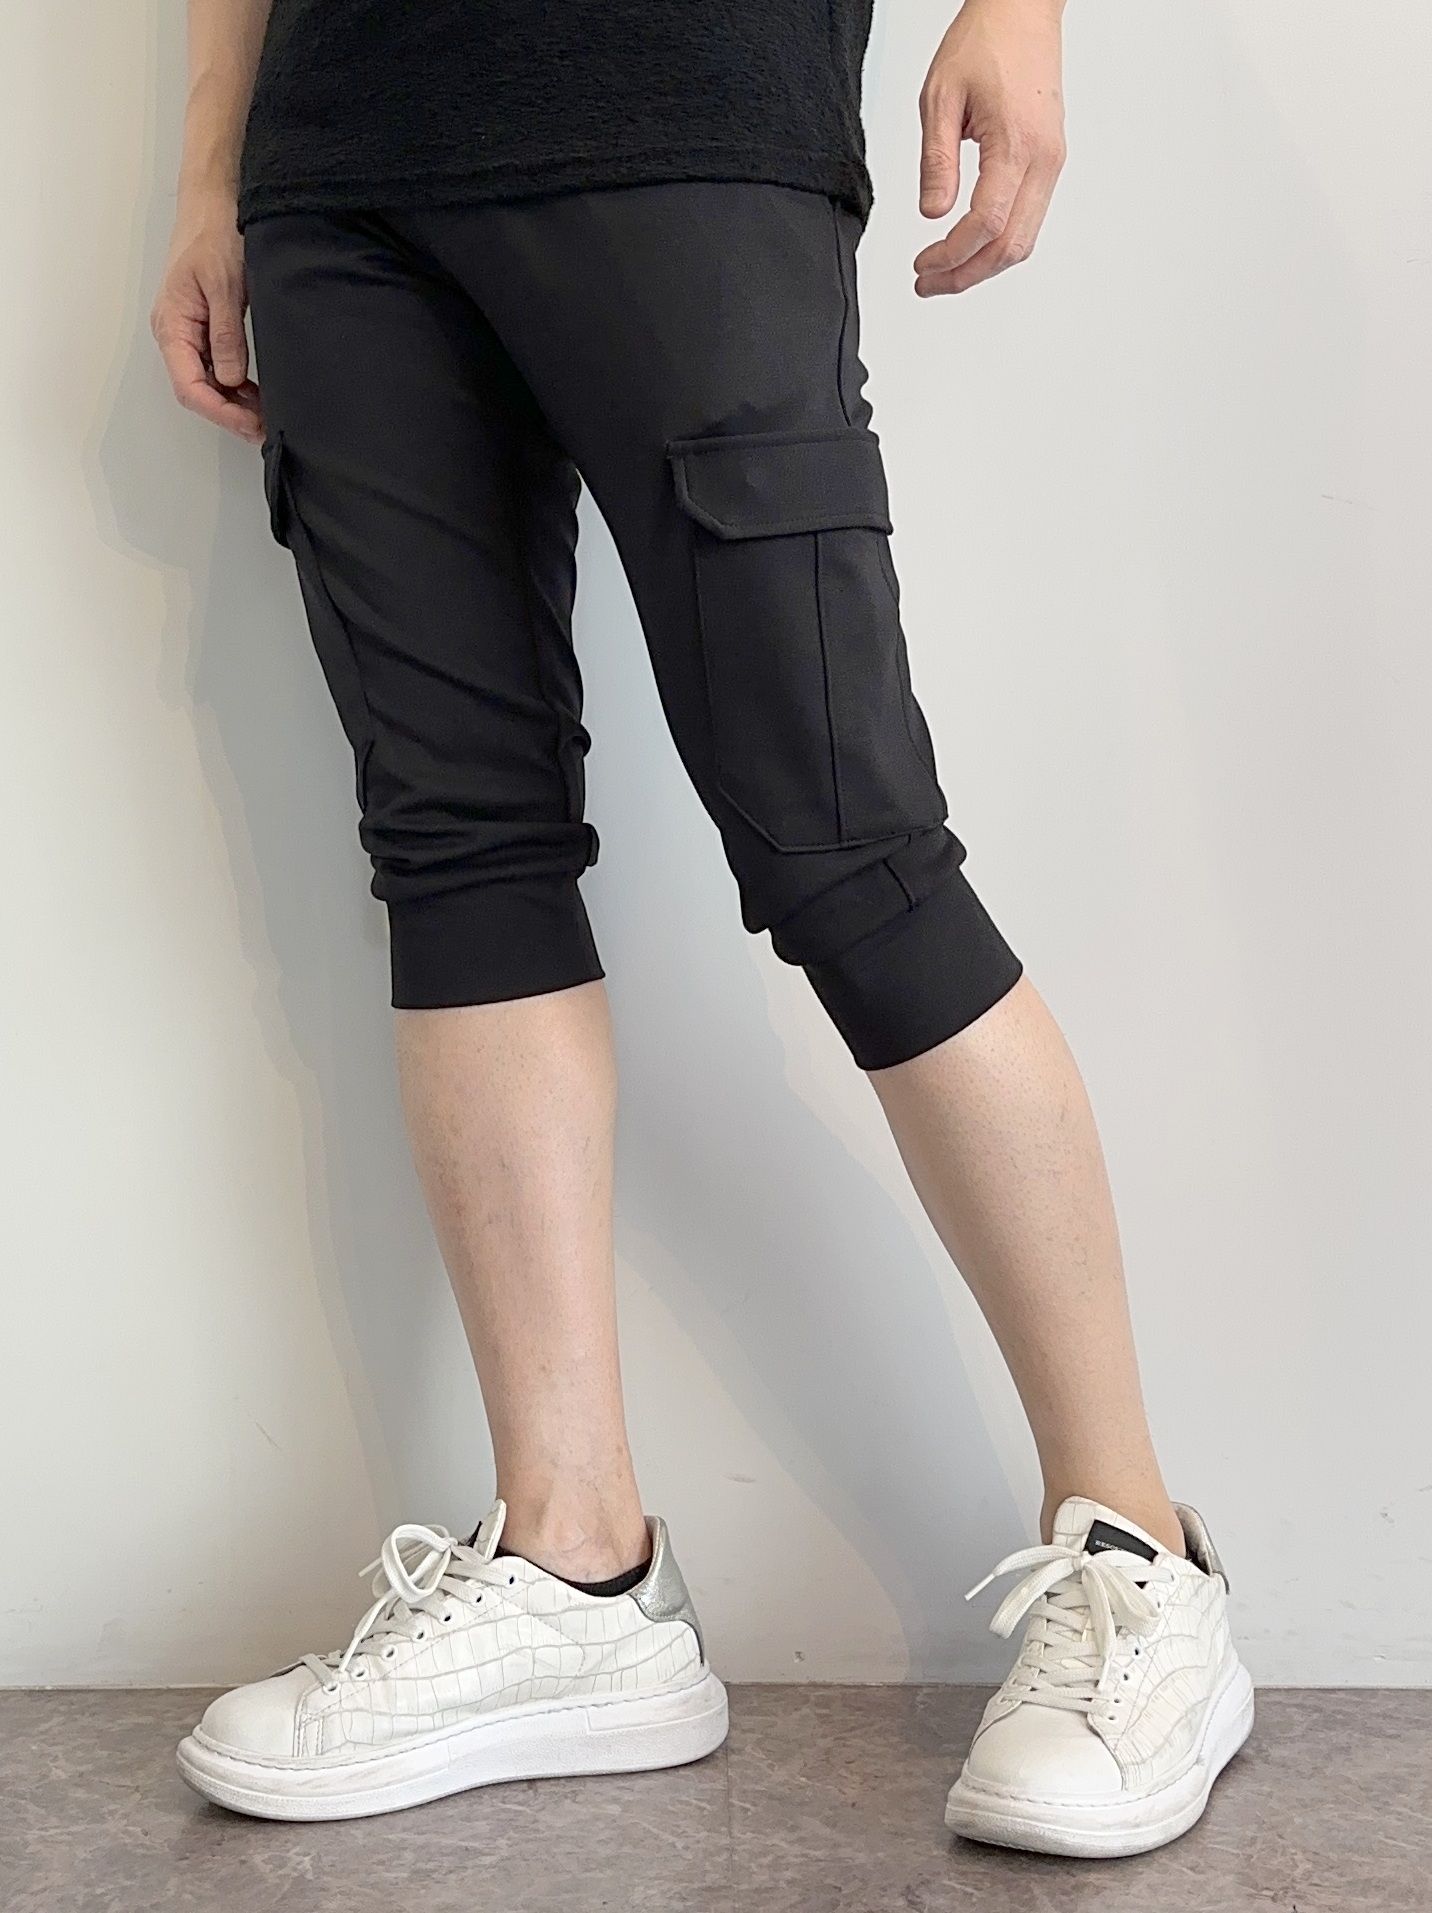 RESOUND CLOTHING - CARGO CROPPED PT / RC27-HP-001 / カーゴ